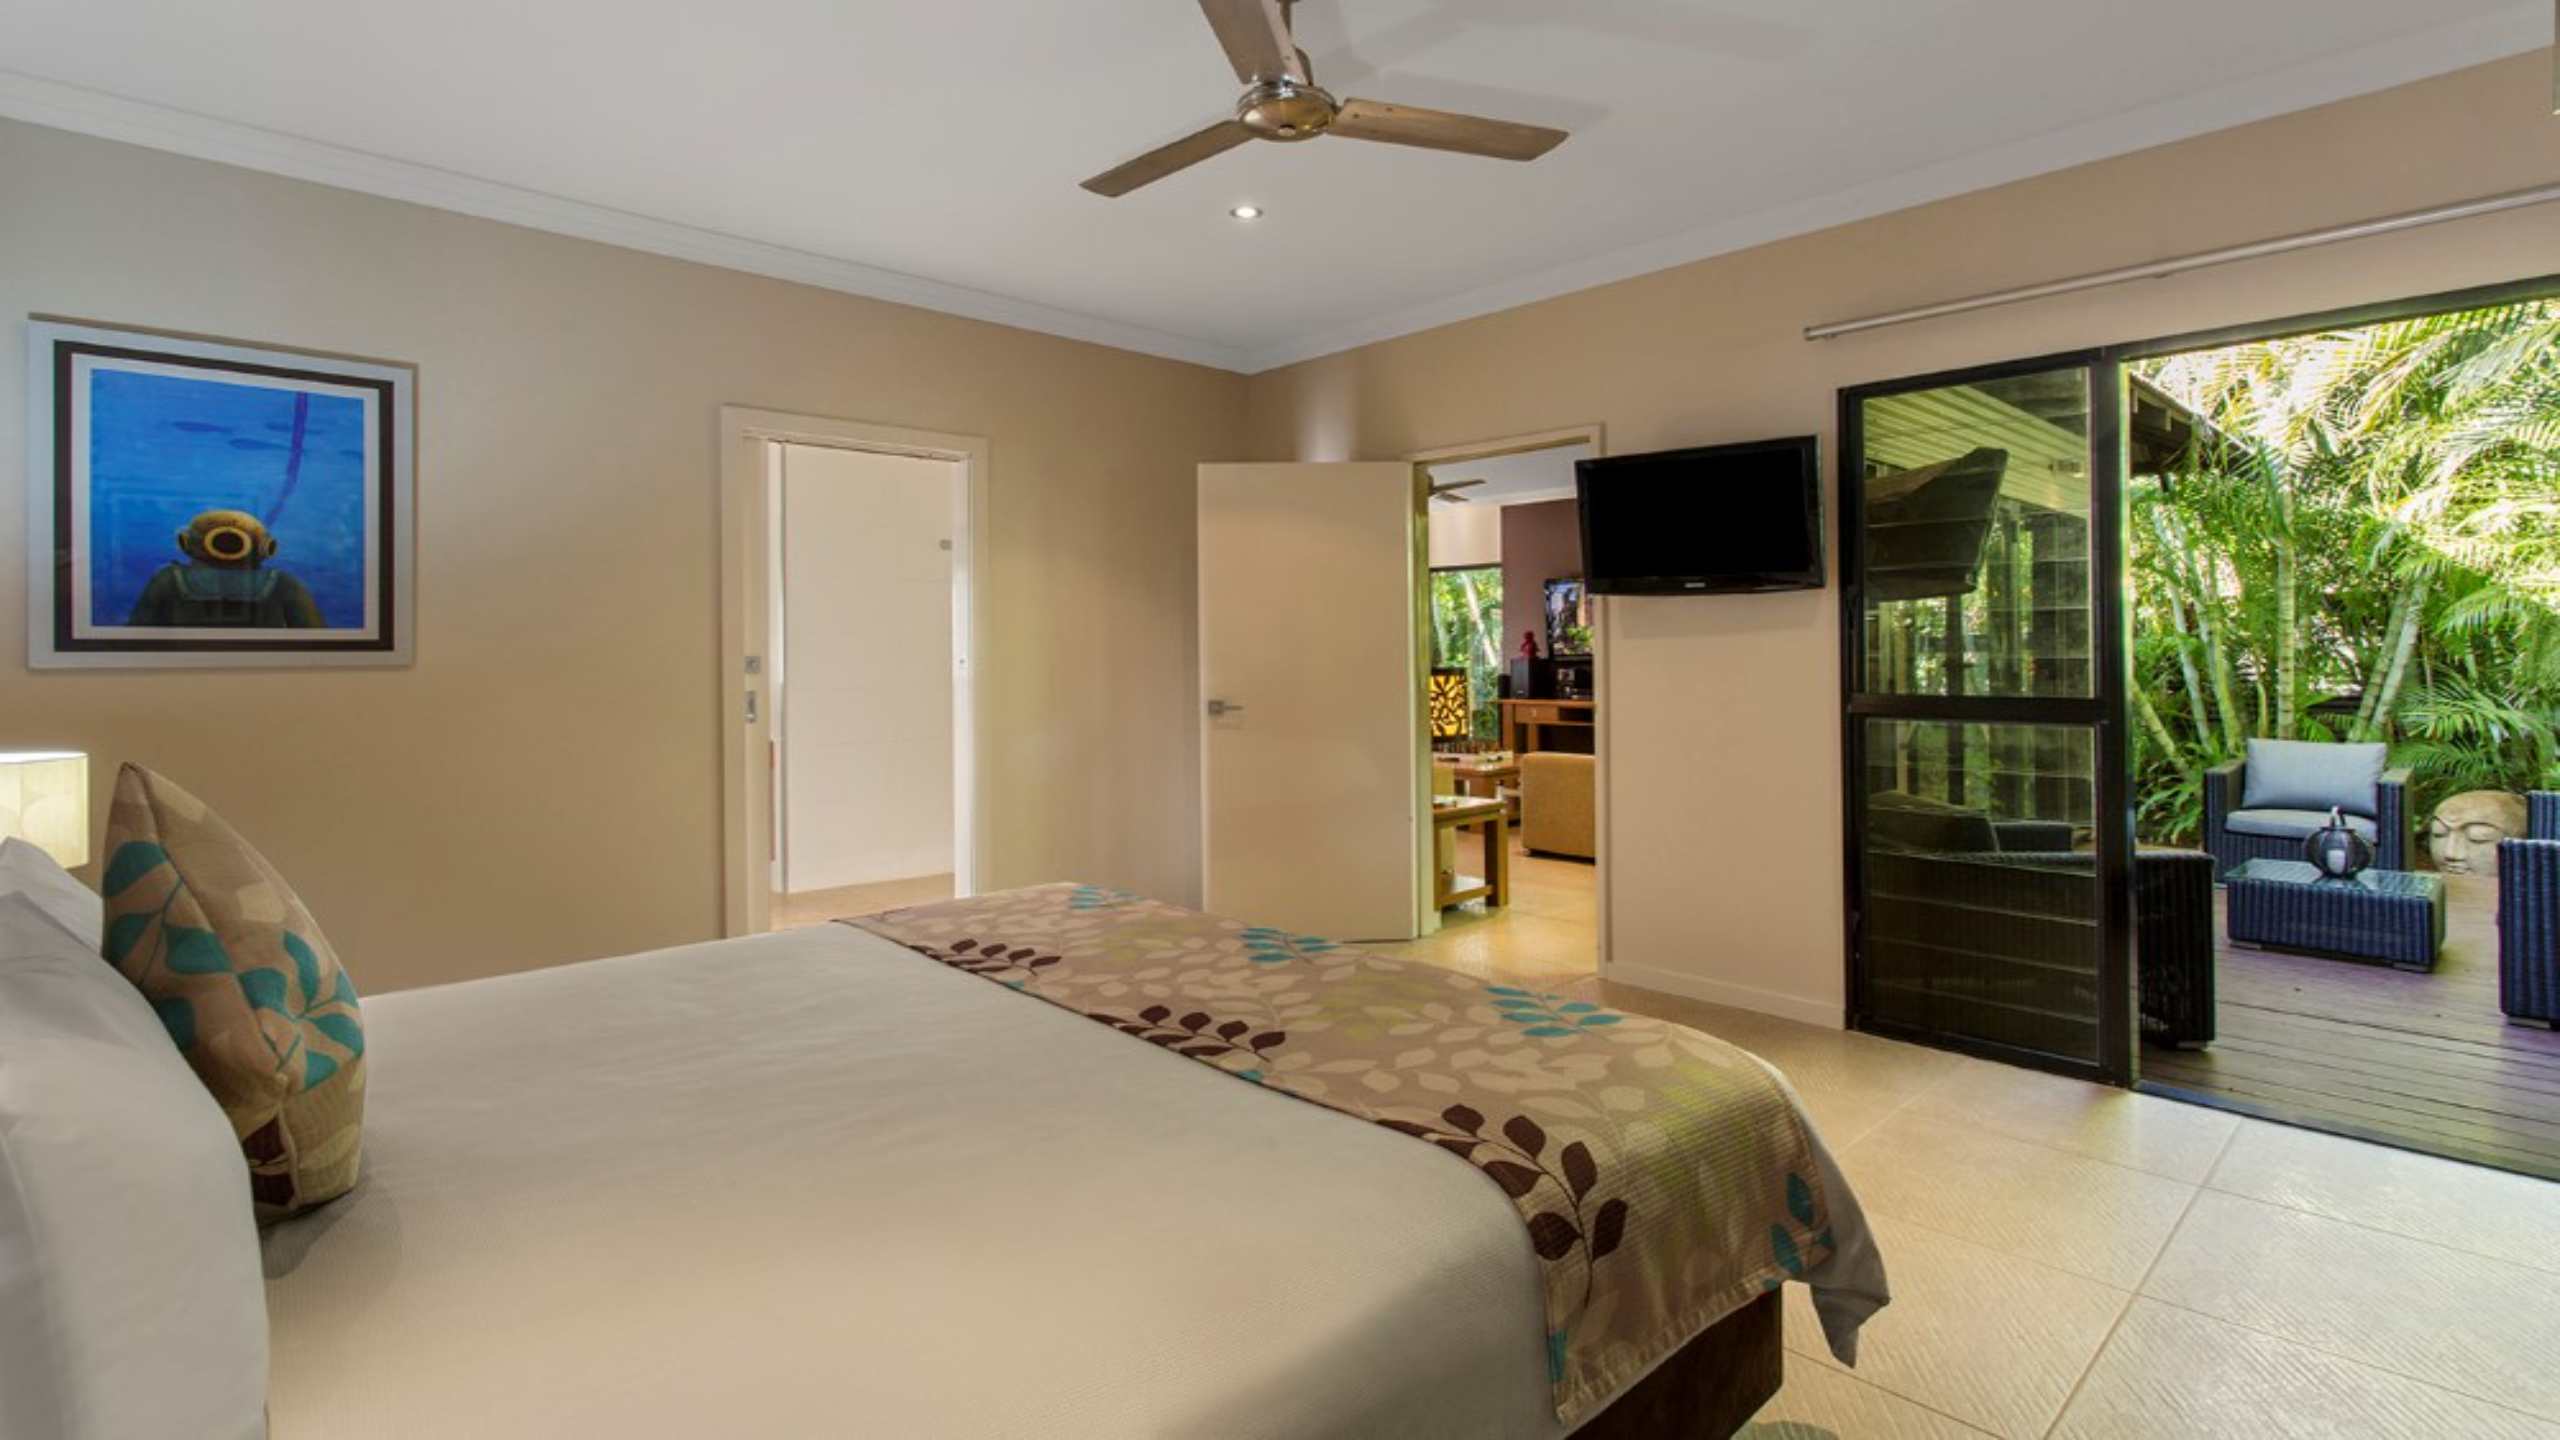 the-pearle-of-cable-beach-broome-western-australia-luxury-resort-accommodation-villa-bedroom-interior-with-balcony